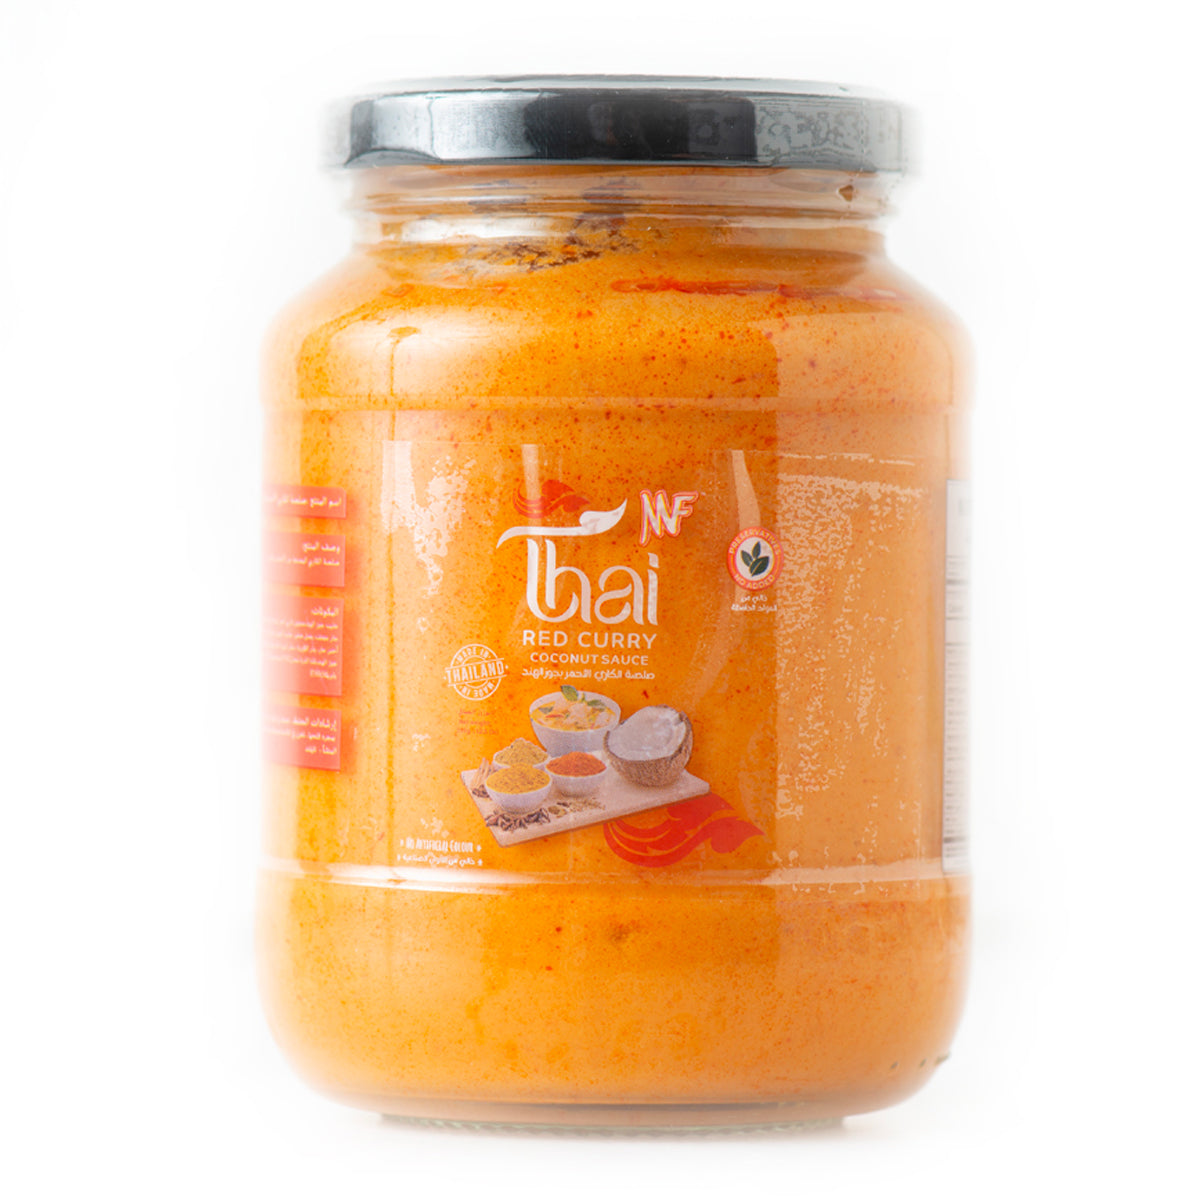 MF Thai Red Curry Coconut Sauce 355g